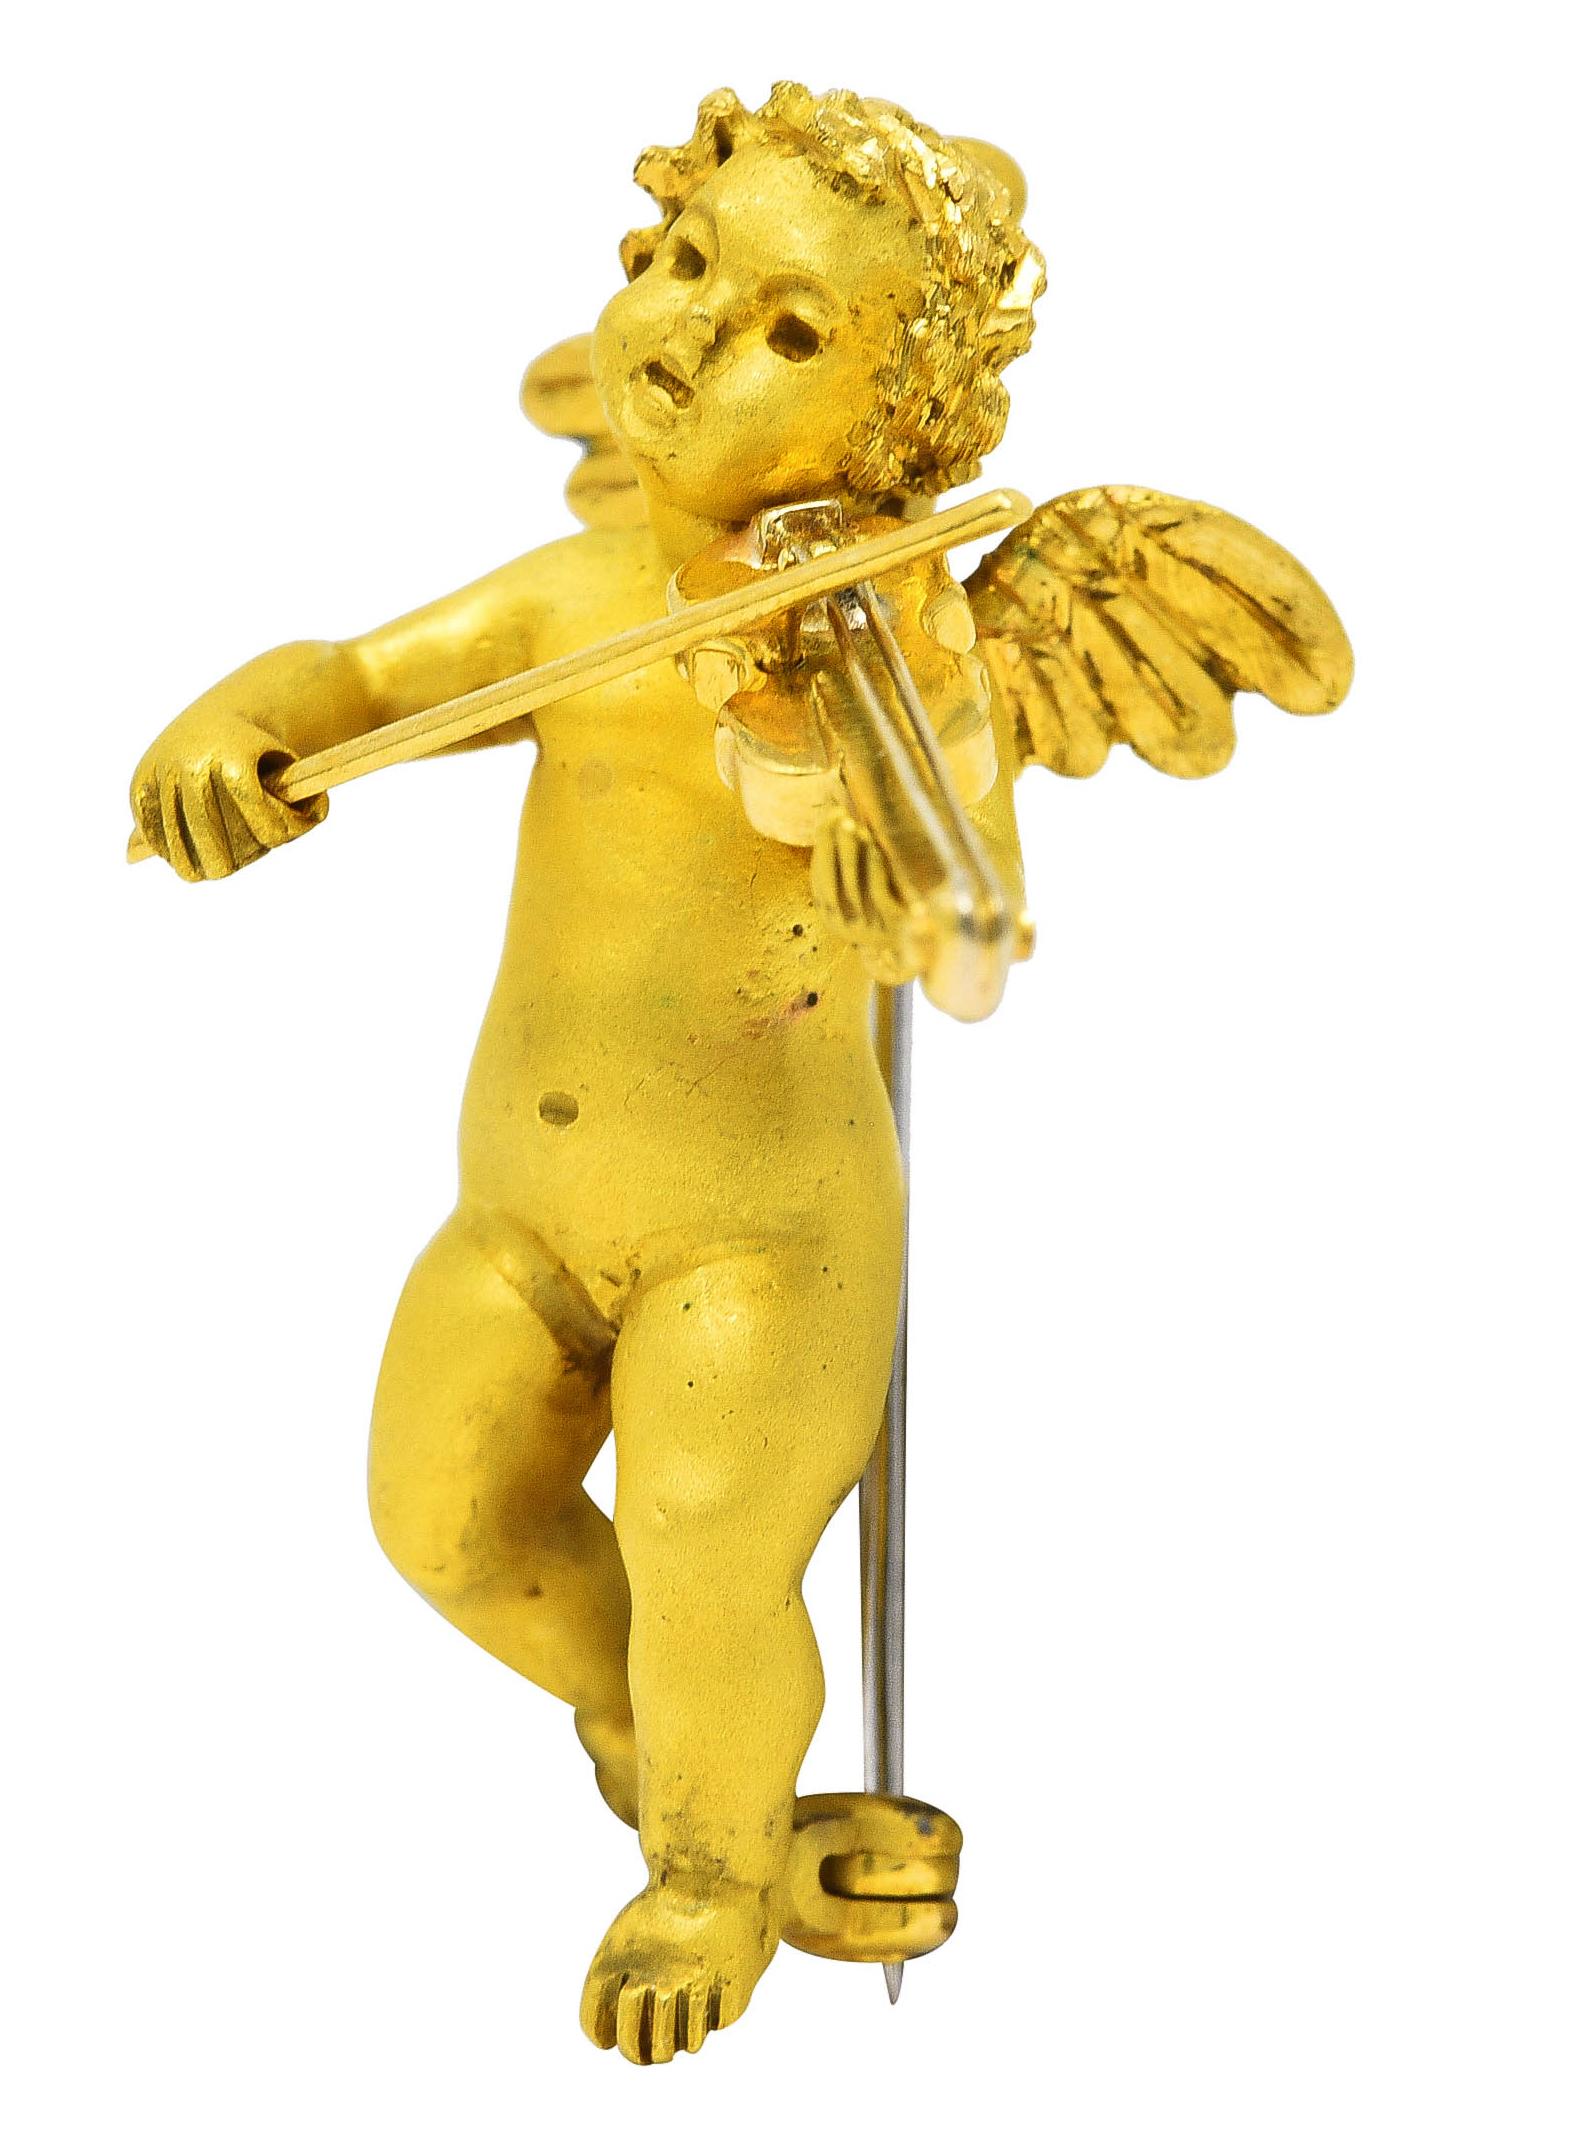 Pendant brooch is designed as a highly rendered winged cherub playing the violin. With texturous hair, engraved feathered wings, and high polished violin. Completed by jump ring and hinged pin stem with locking closure. Stamped 750 for 18 karat